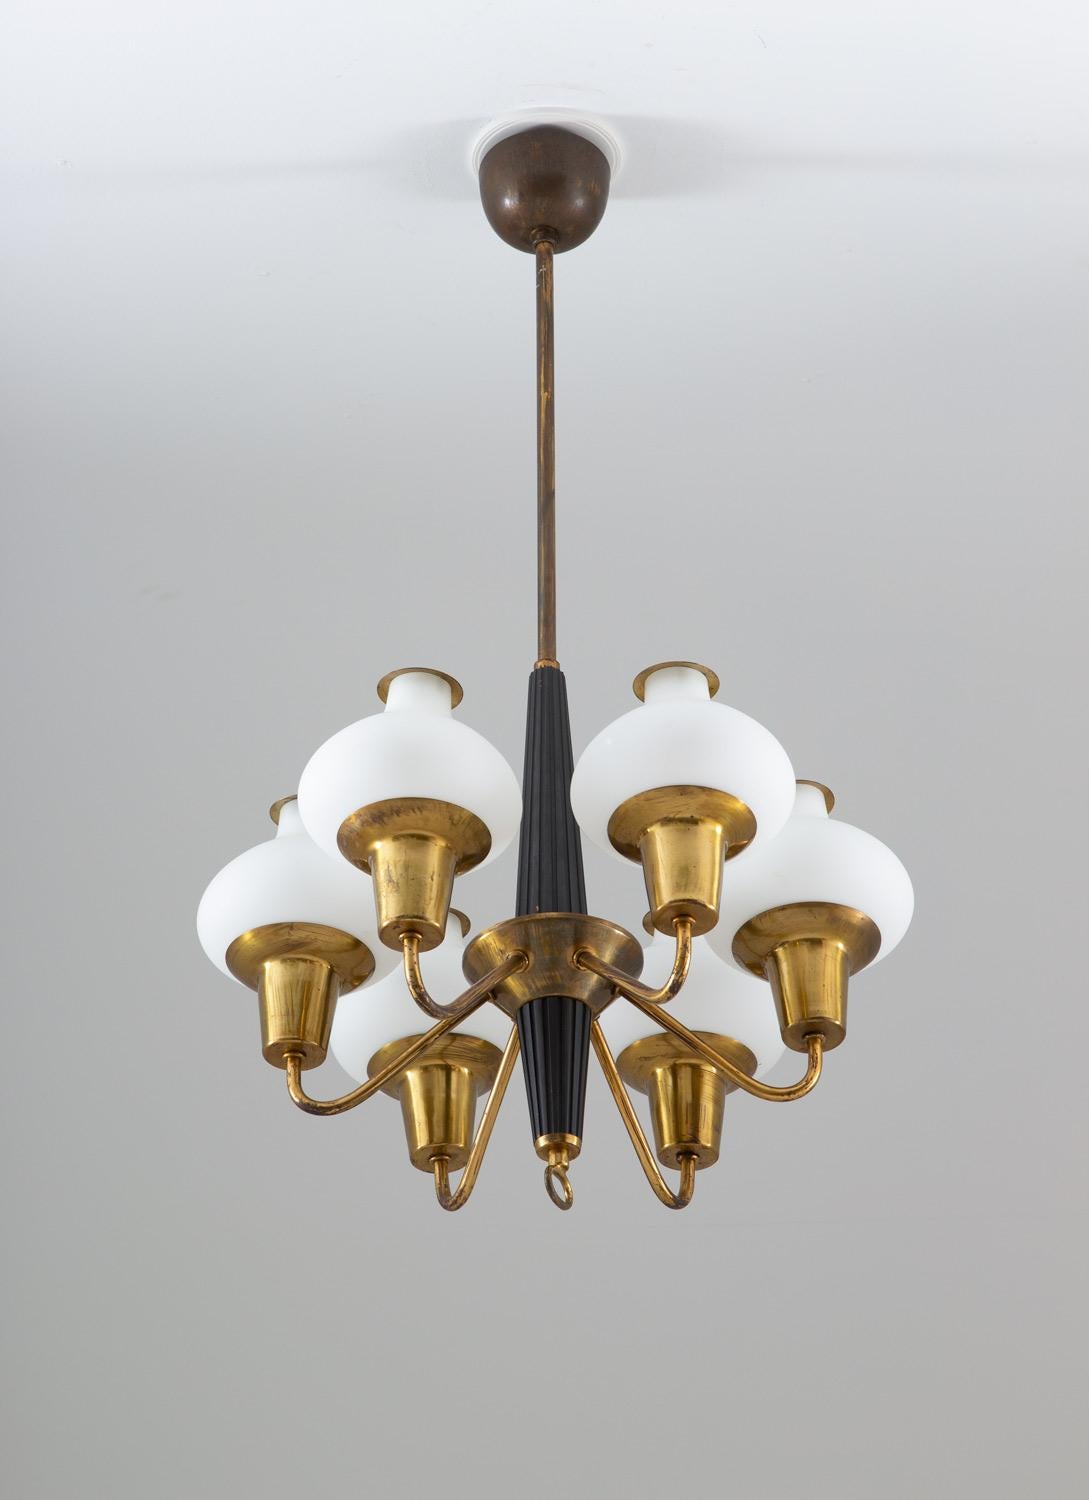 Rare midcentury pendant in brass, wood and frosted opaline glass designed by Hans-Agne Jakobsson for Karlskrona Lampfabrik, Sweden
This great looking pendant is of quality and has great details. It features six light sources, hidden by frosted